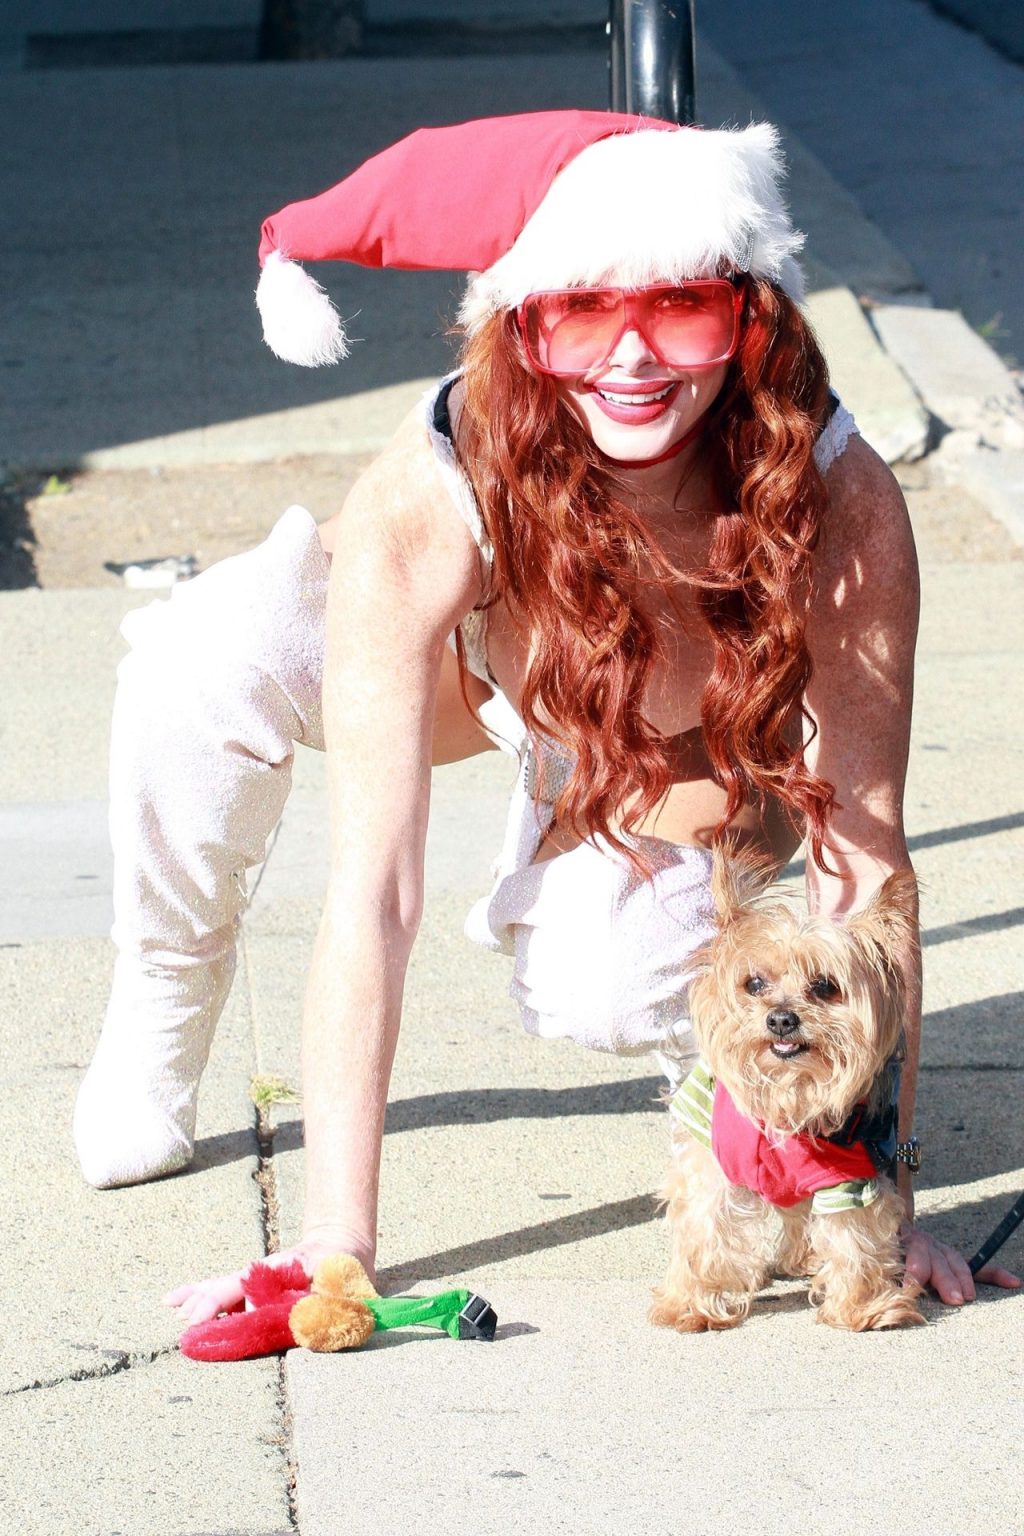 Phoebe Price is Seen in the Spirit for the Holidays (41 Photos)